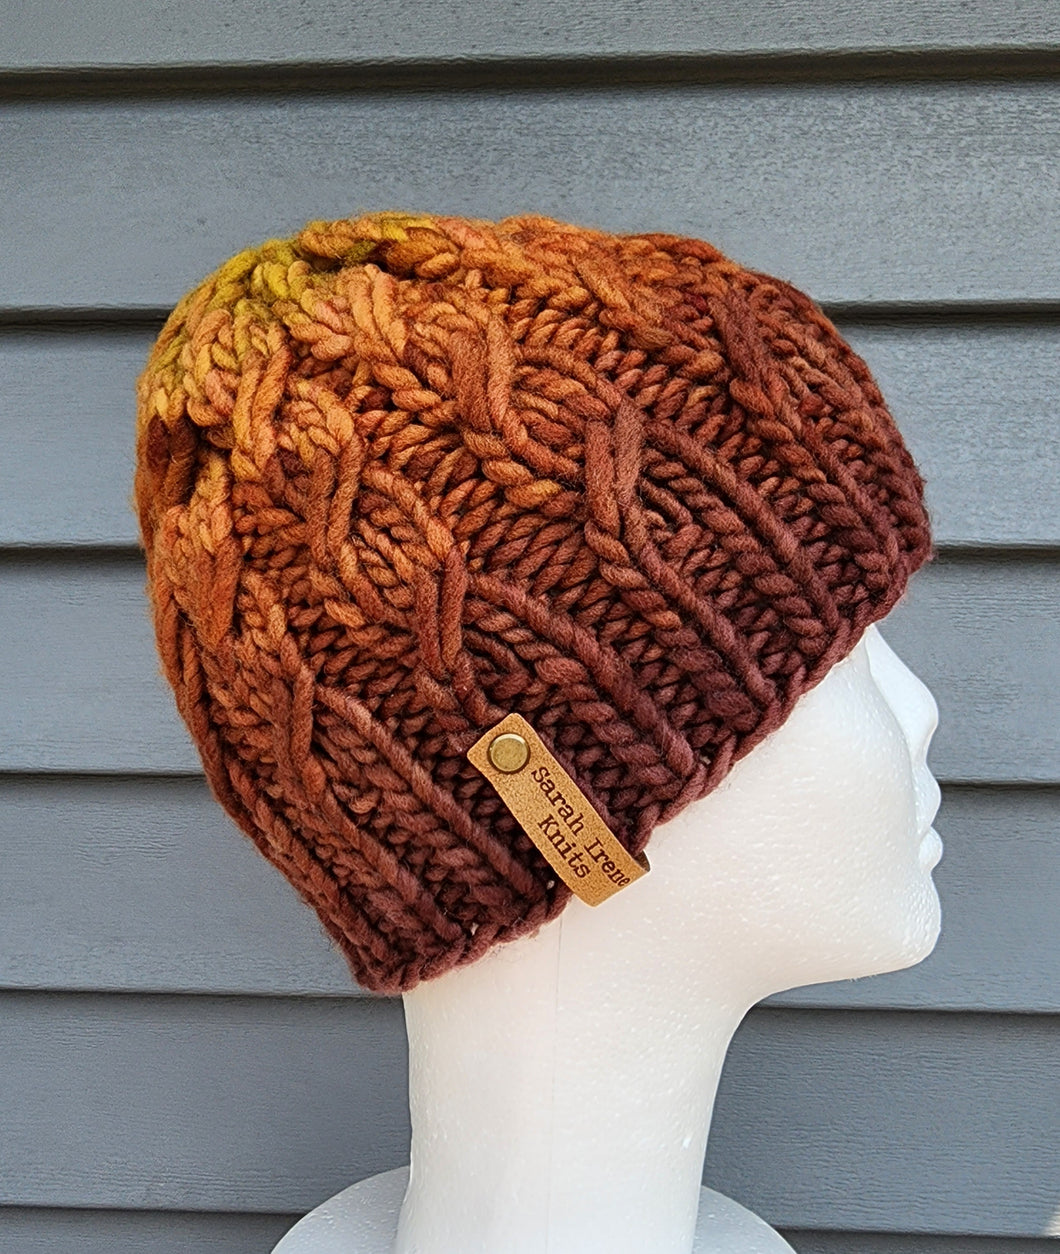 Cable effect beanie in gradient from Brown to orange to yellow-green on top.